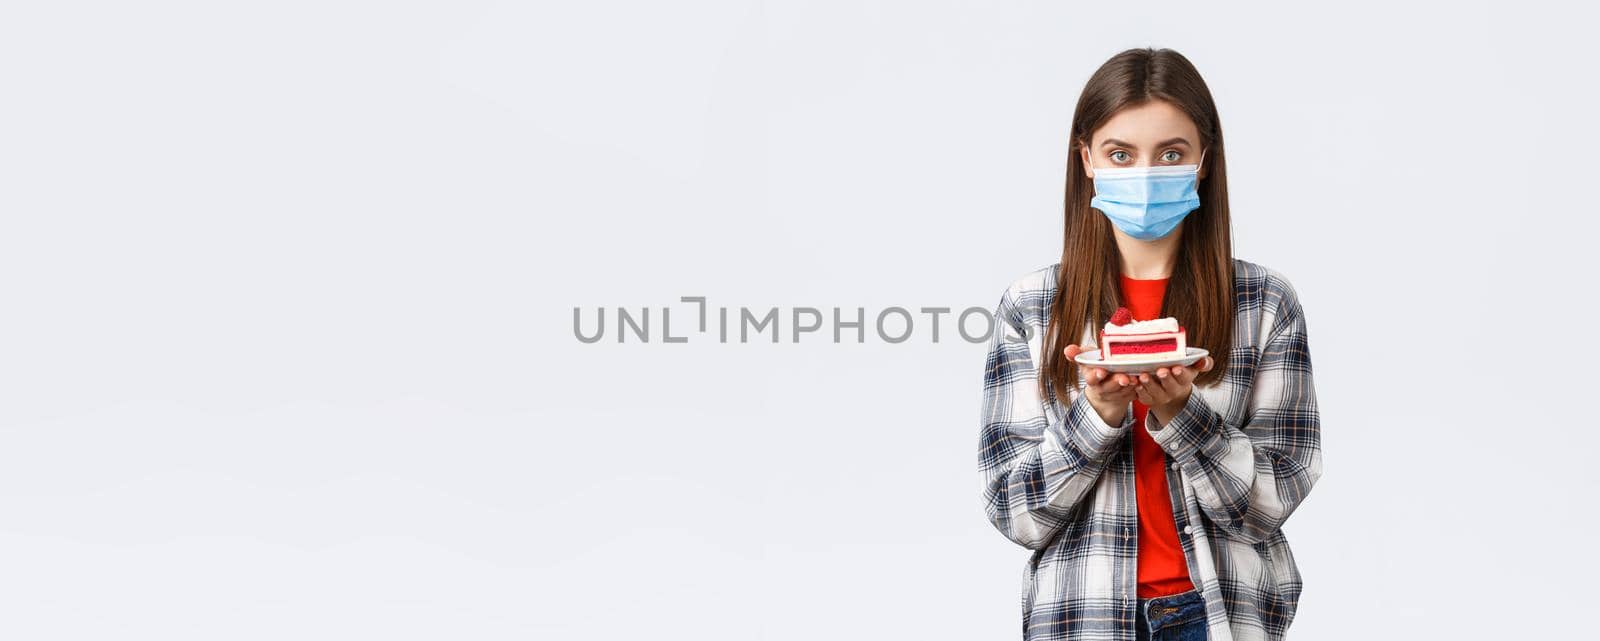 Coronavirus outbreak, lifestyle during social distancing and holidays celebration concept. Young cute girl in medical mask and casual outfit, holding birthday cake and looking serious camera by Benzoix